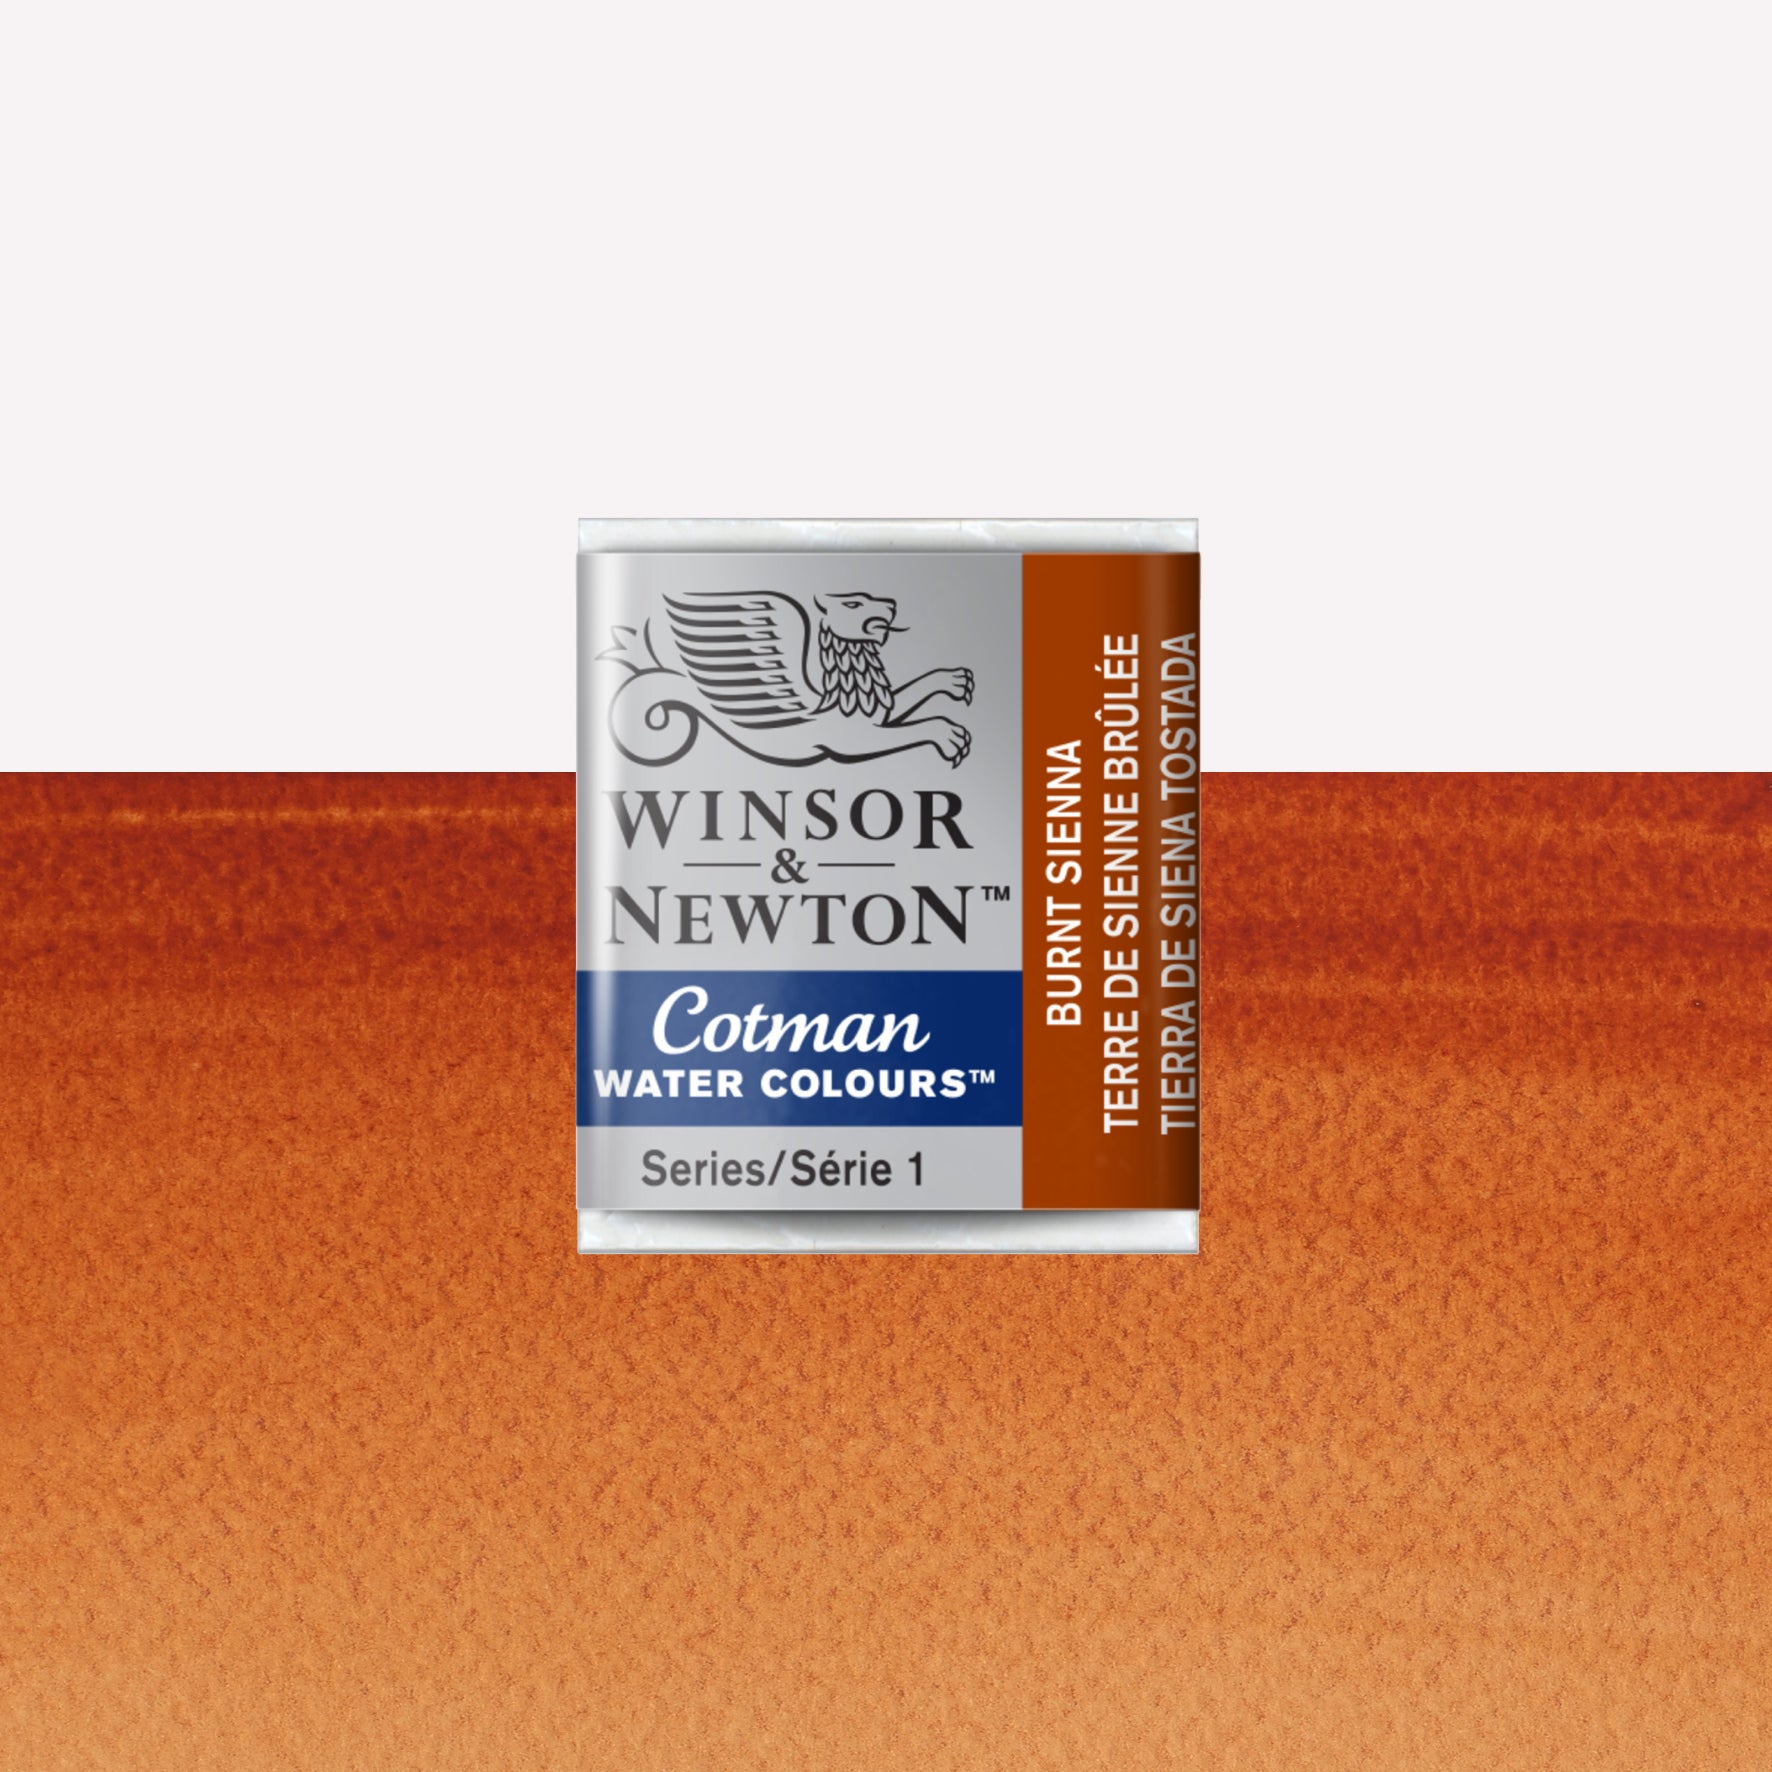 Winsor & Newton Cotman watercolour half pan in the shade Burnt Sienna over a vibrant colour swatch. These half pans have a solid formula and are packaged in compressed paint cake. 